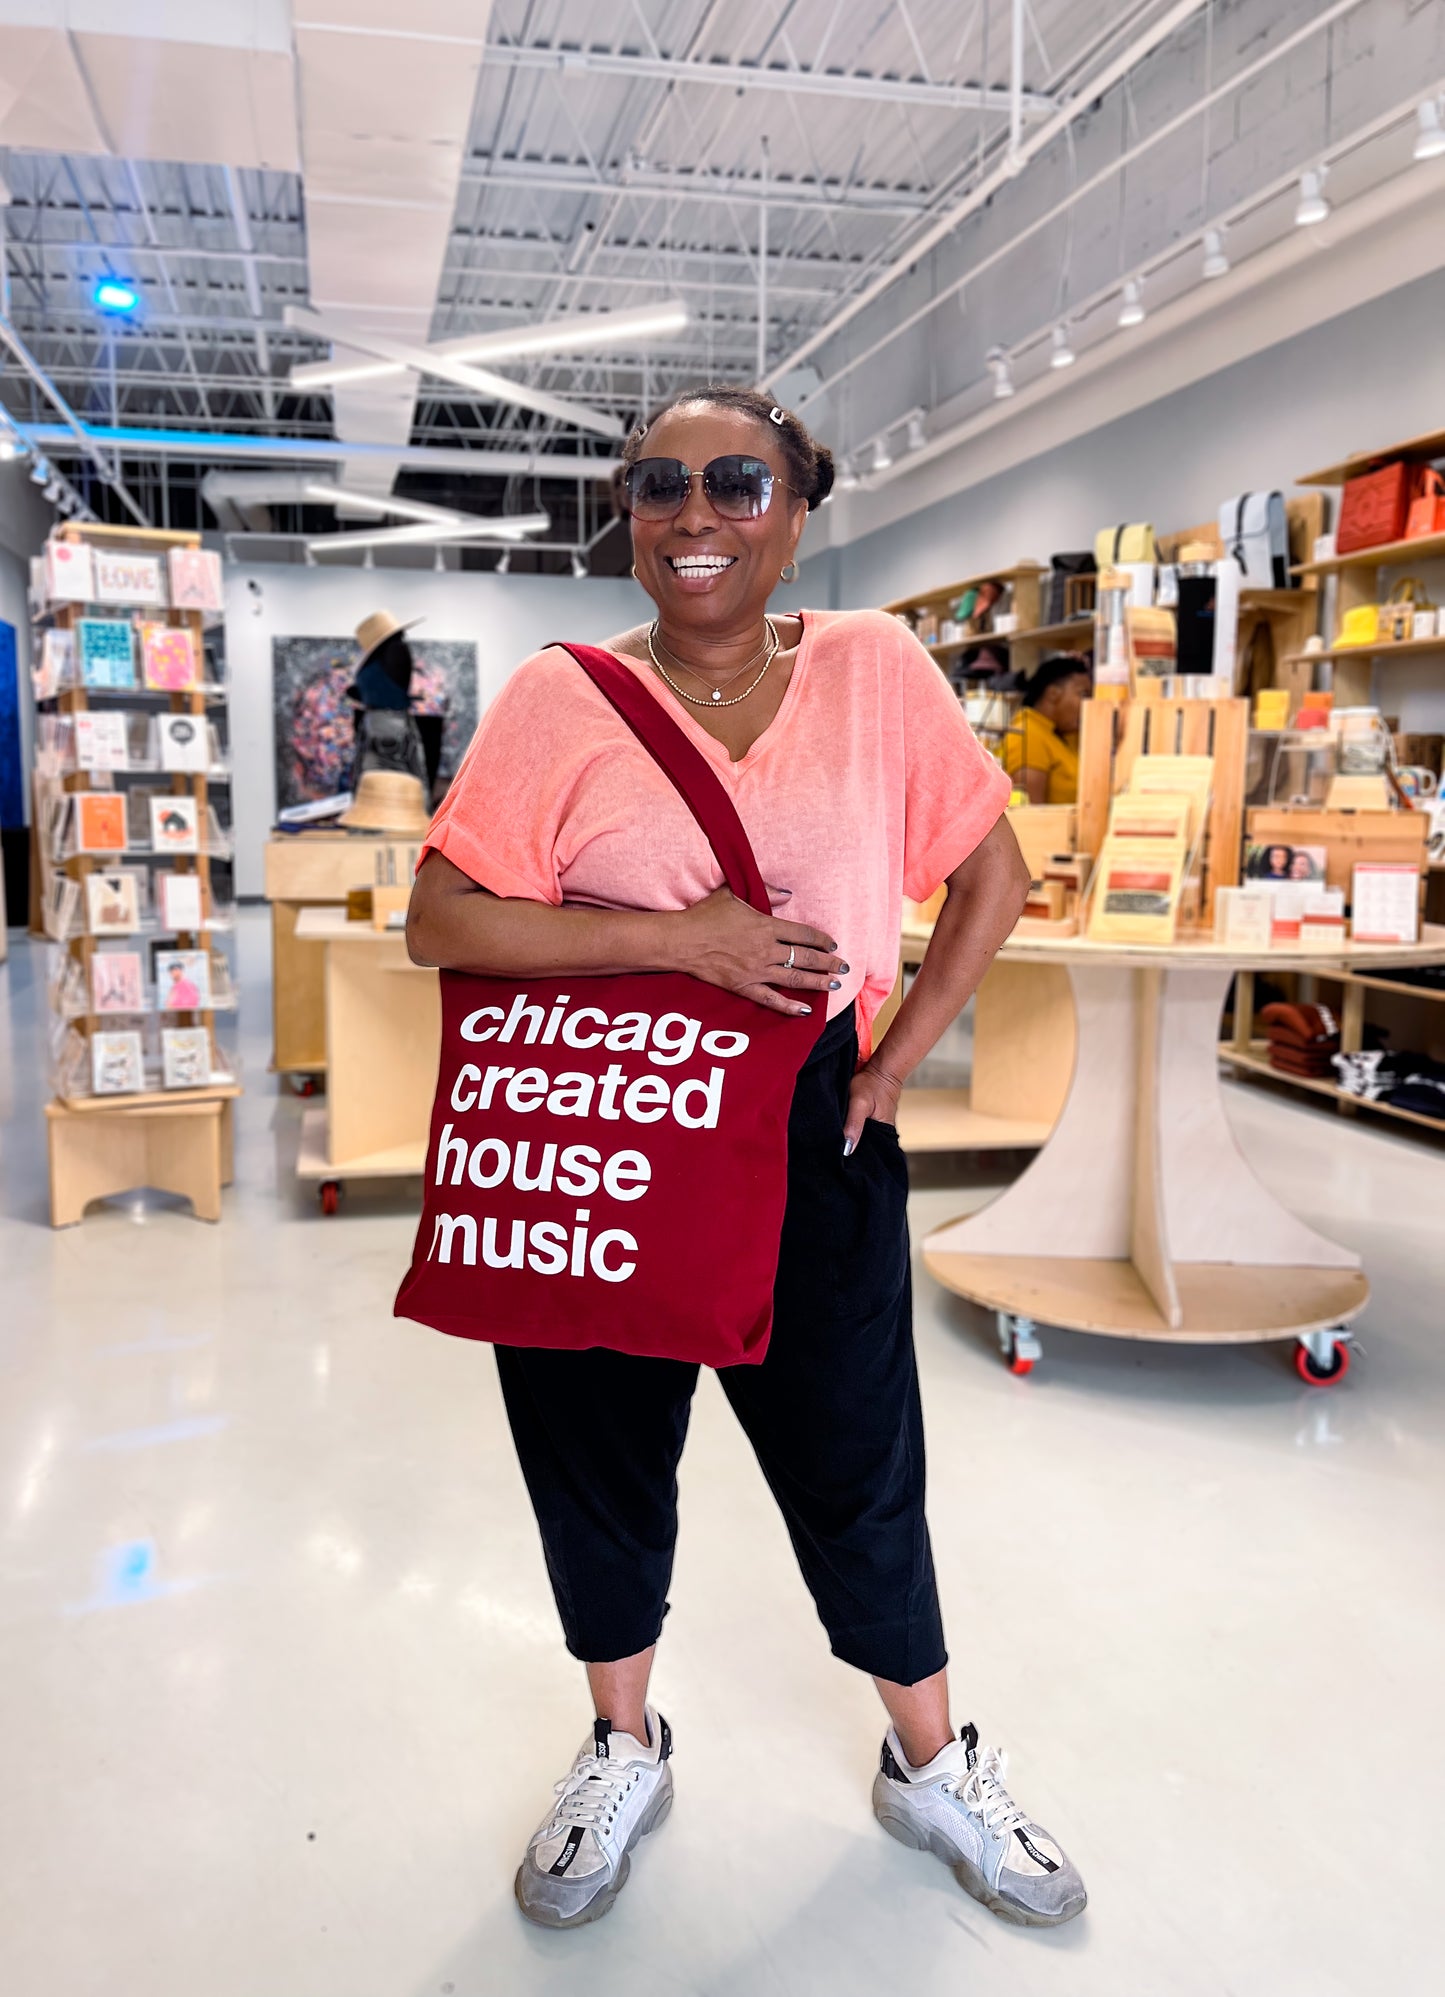 Silverroom | Chicago Created House Music Tote Bag